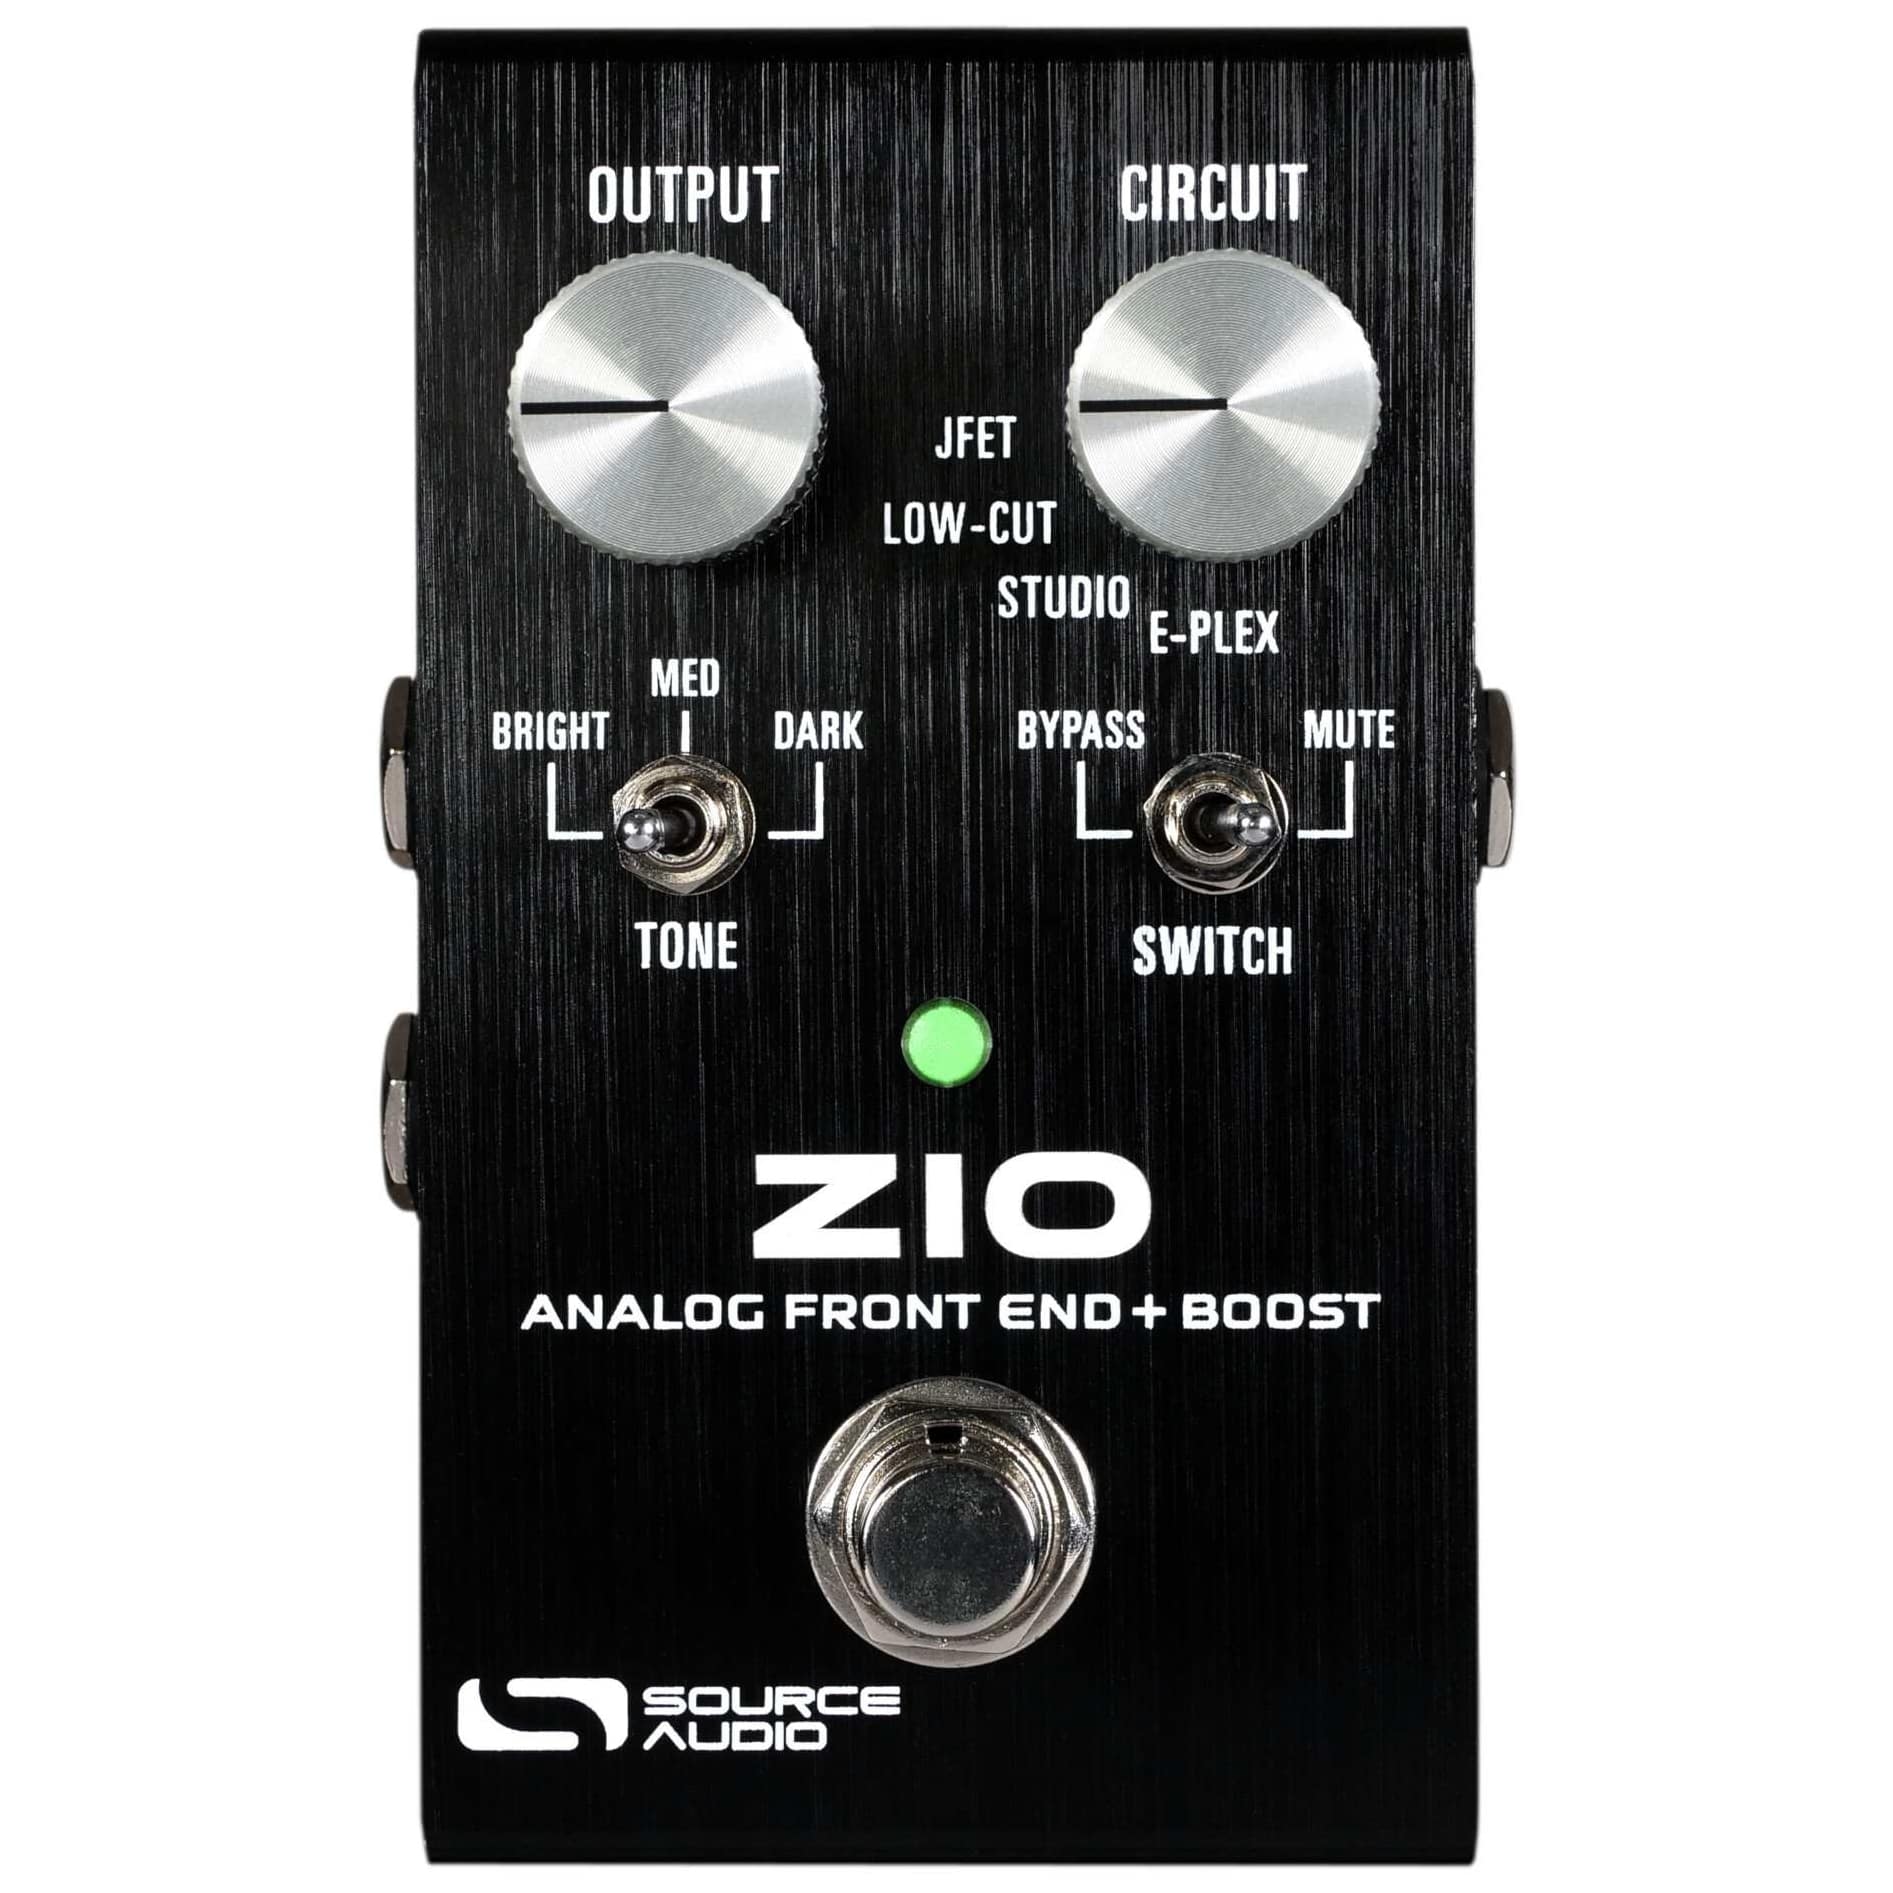 Source Audio SA 271-ZIO Analog Front End + Boost